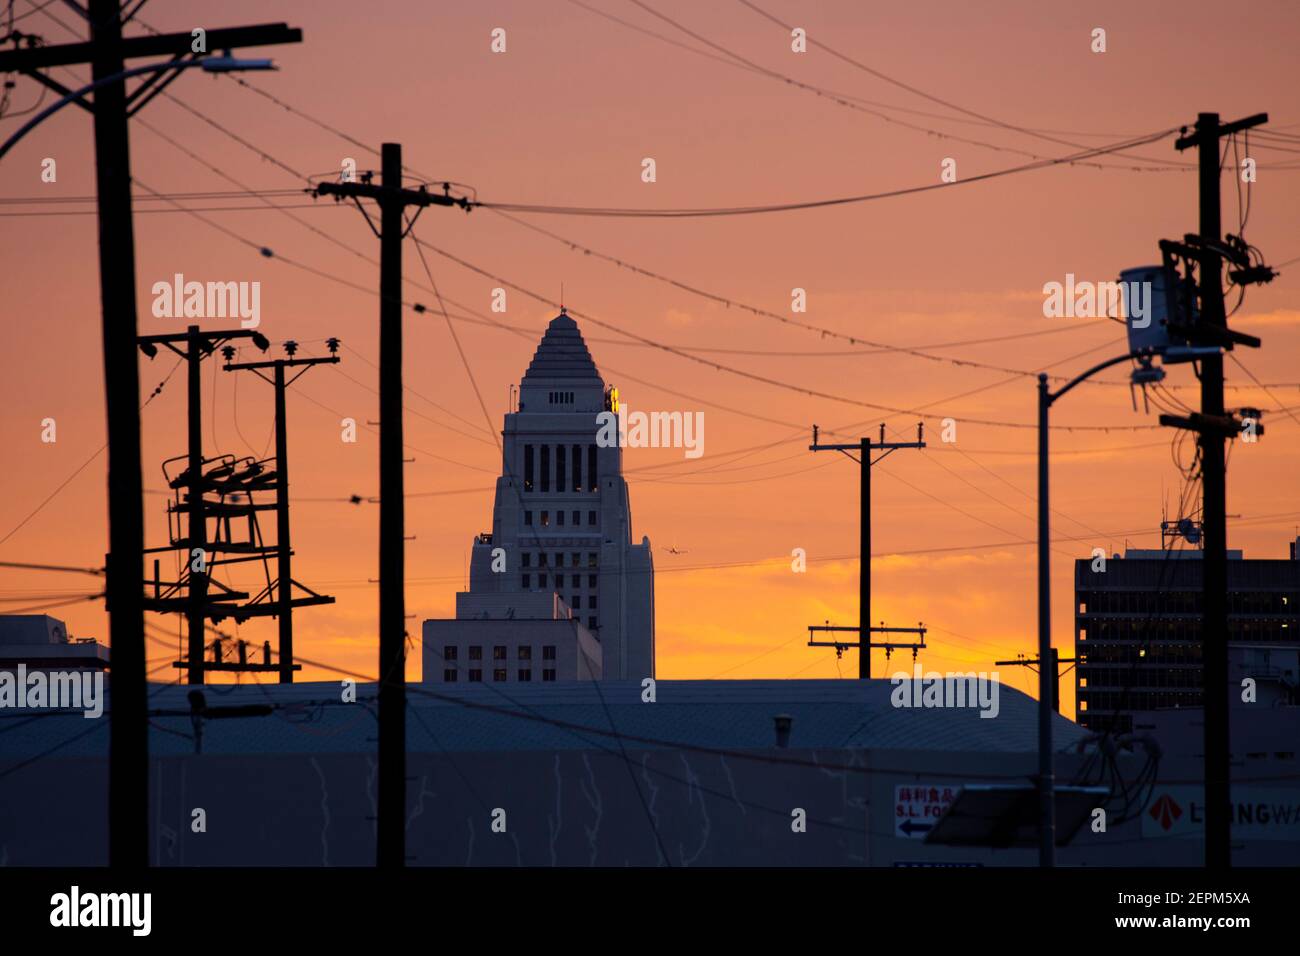 gritty sunset view of Los Angeles city hall building through power lines at sunset Stock Photo